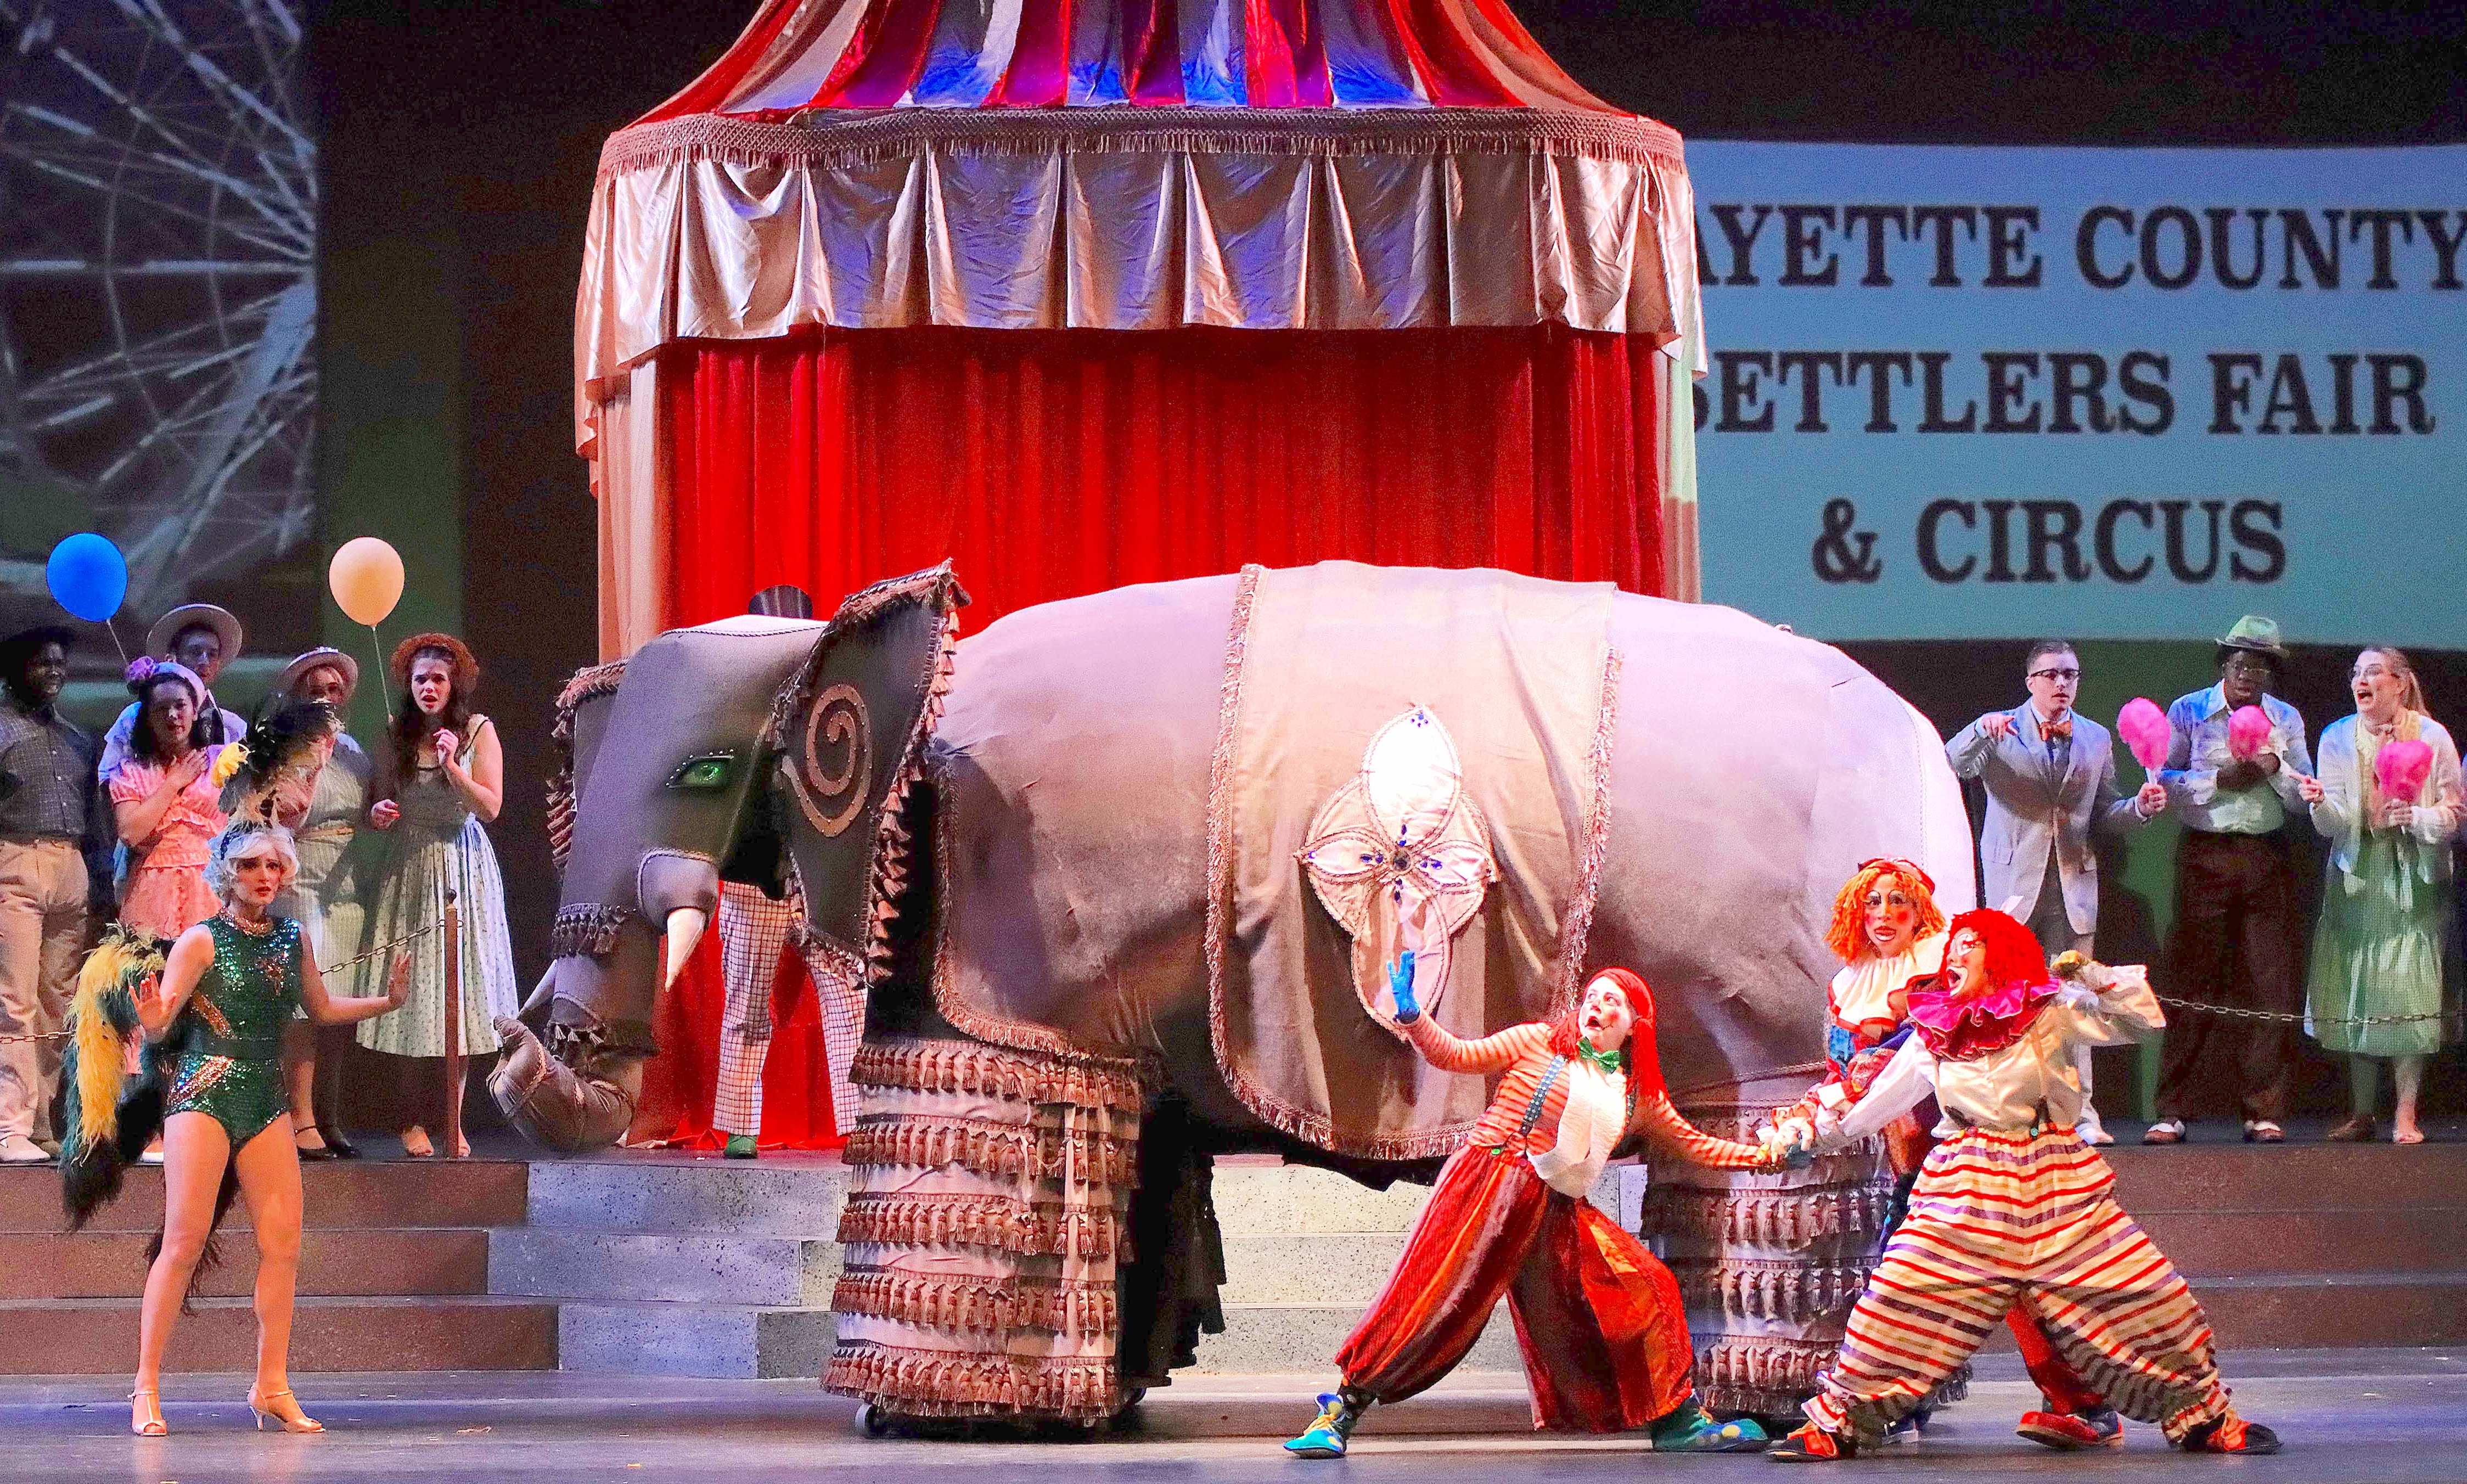 Image of a circus